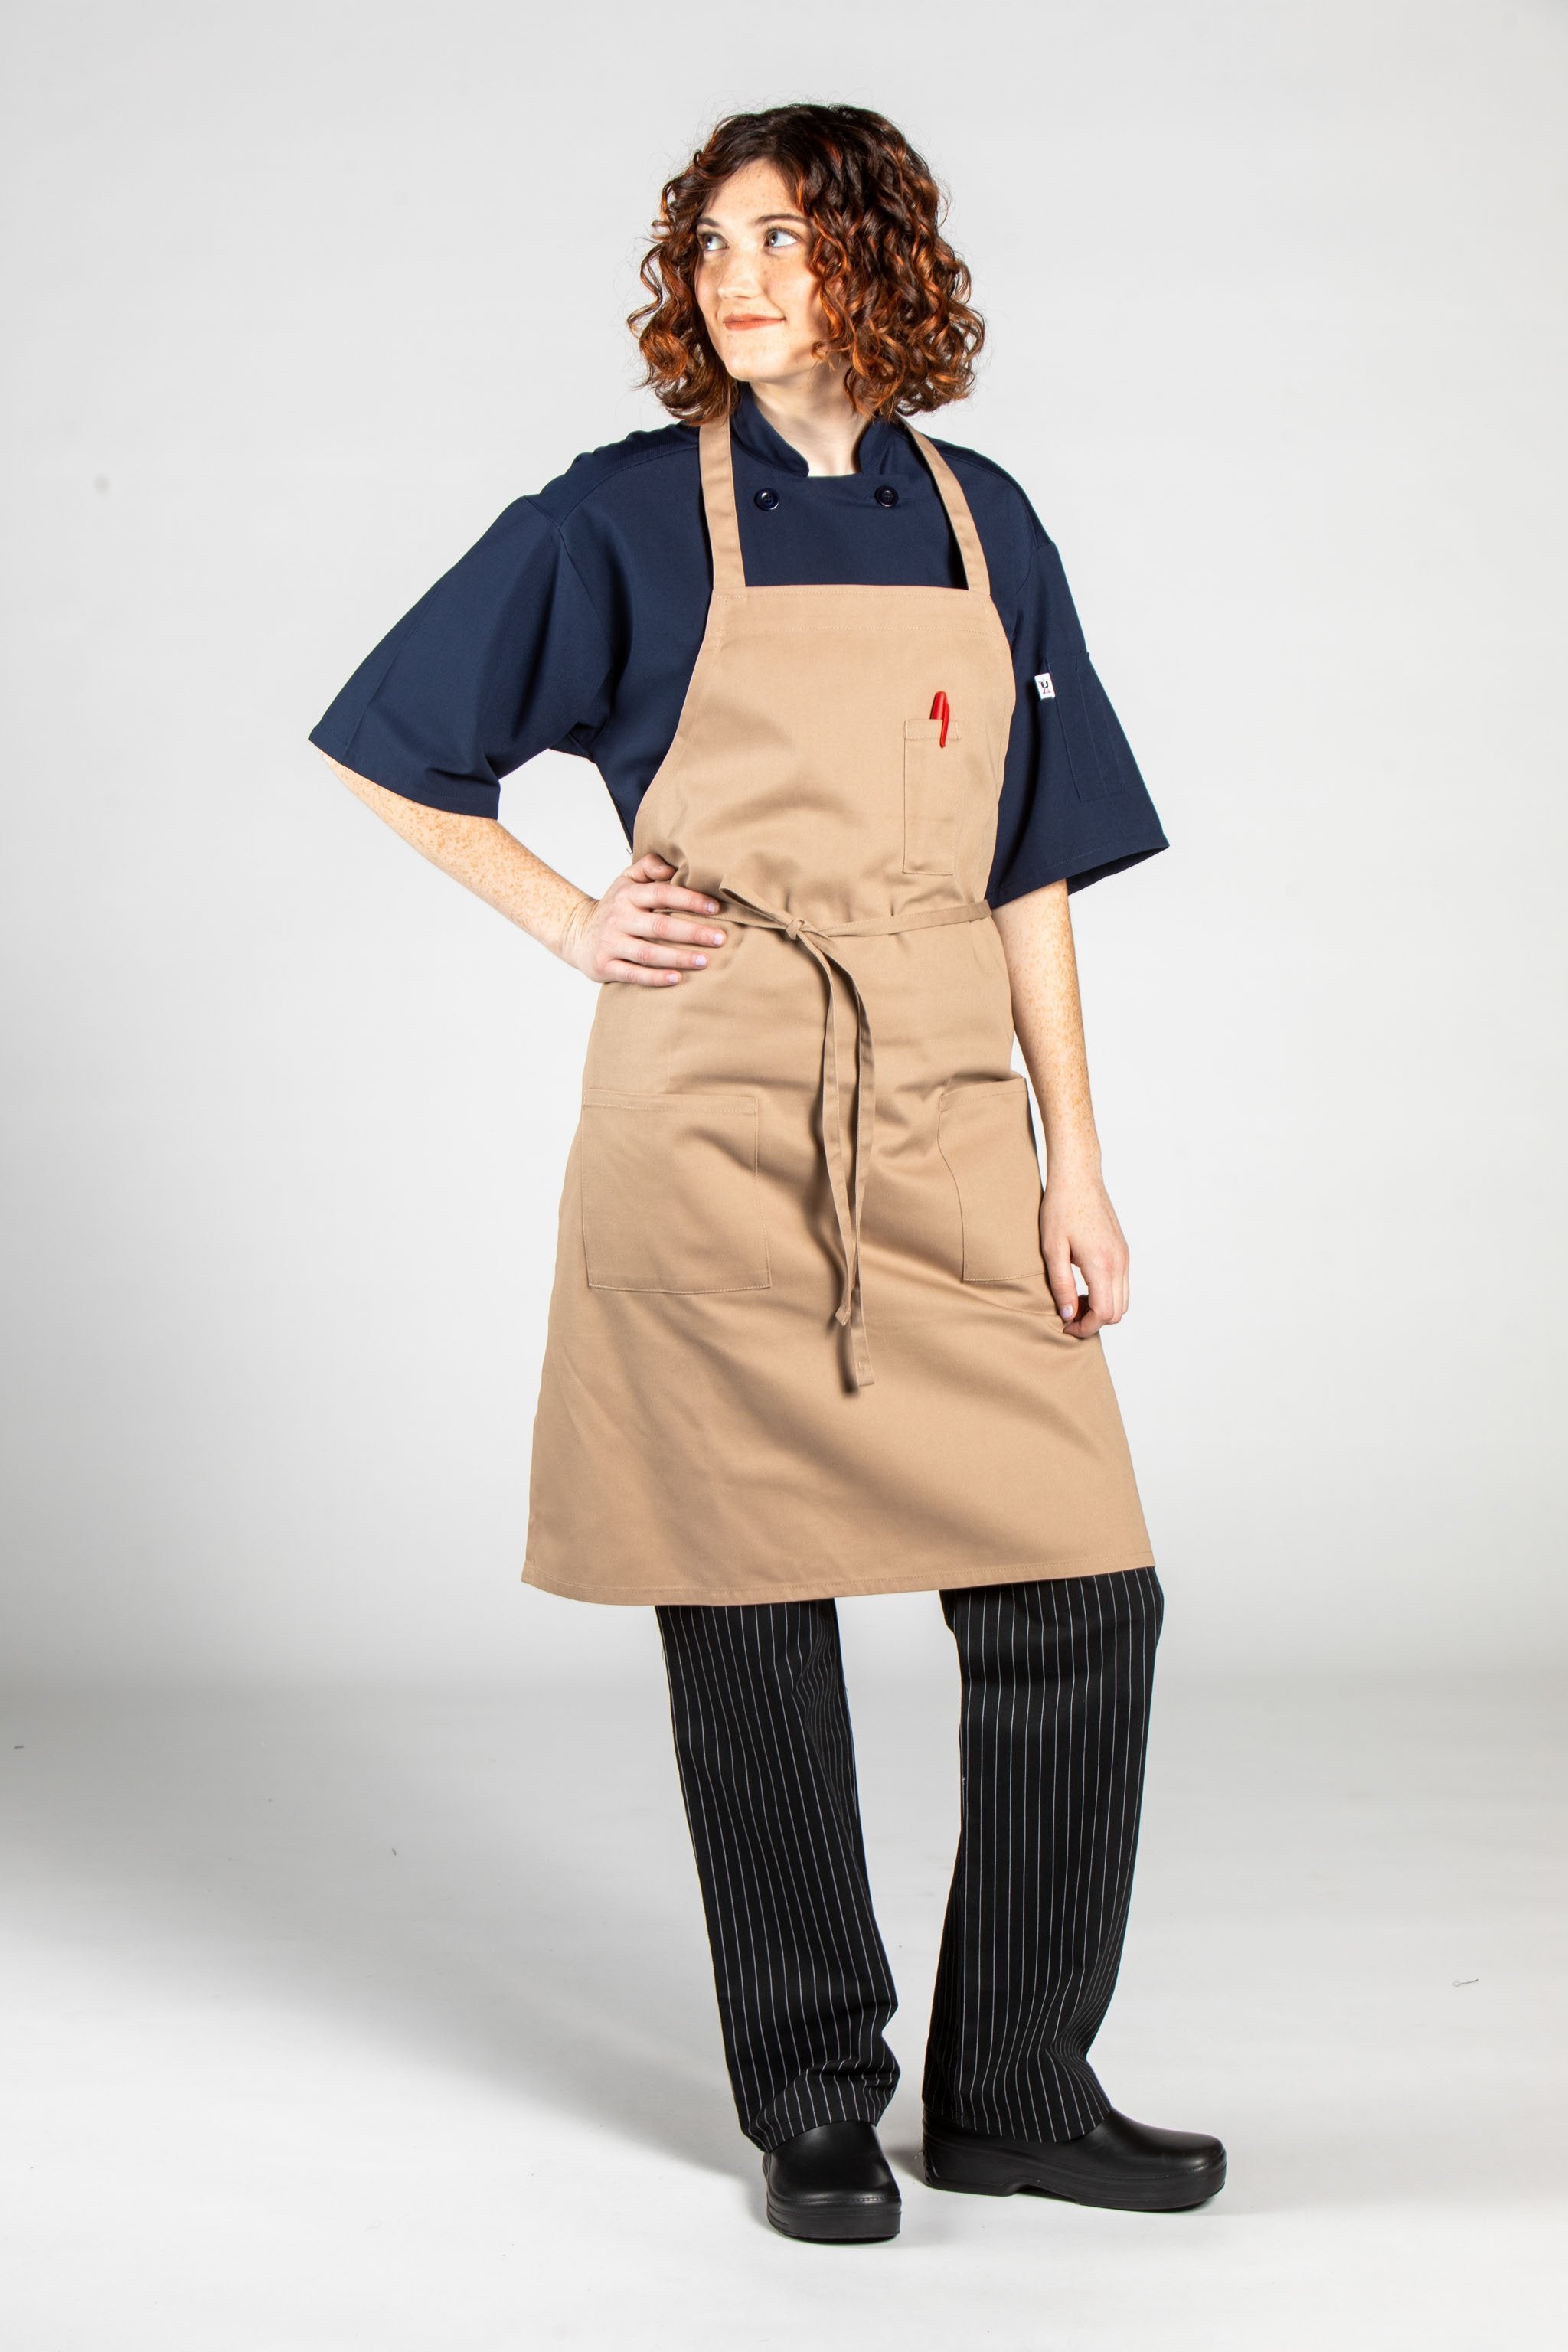 Aprons – tagged 